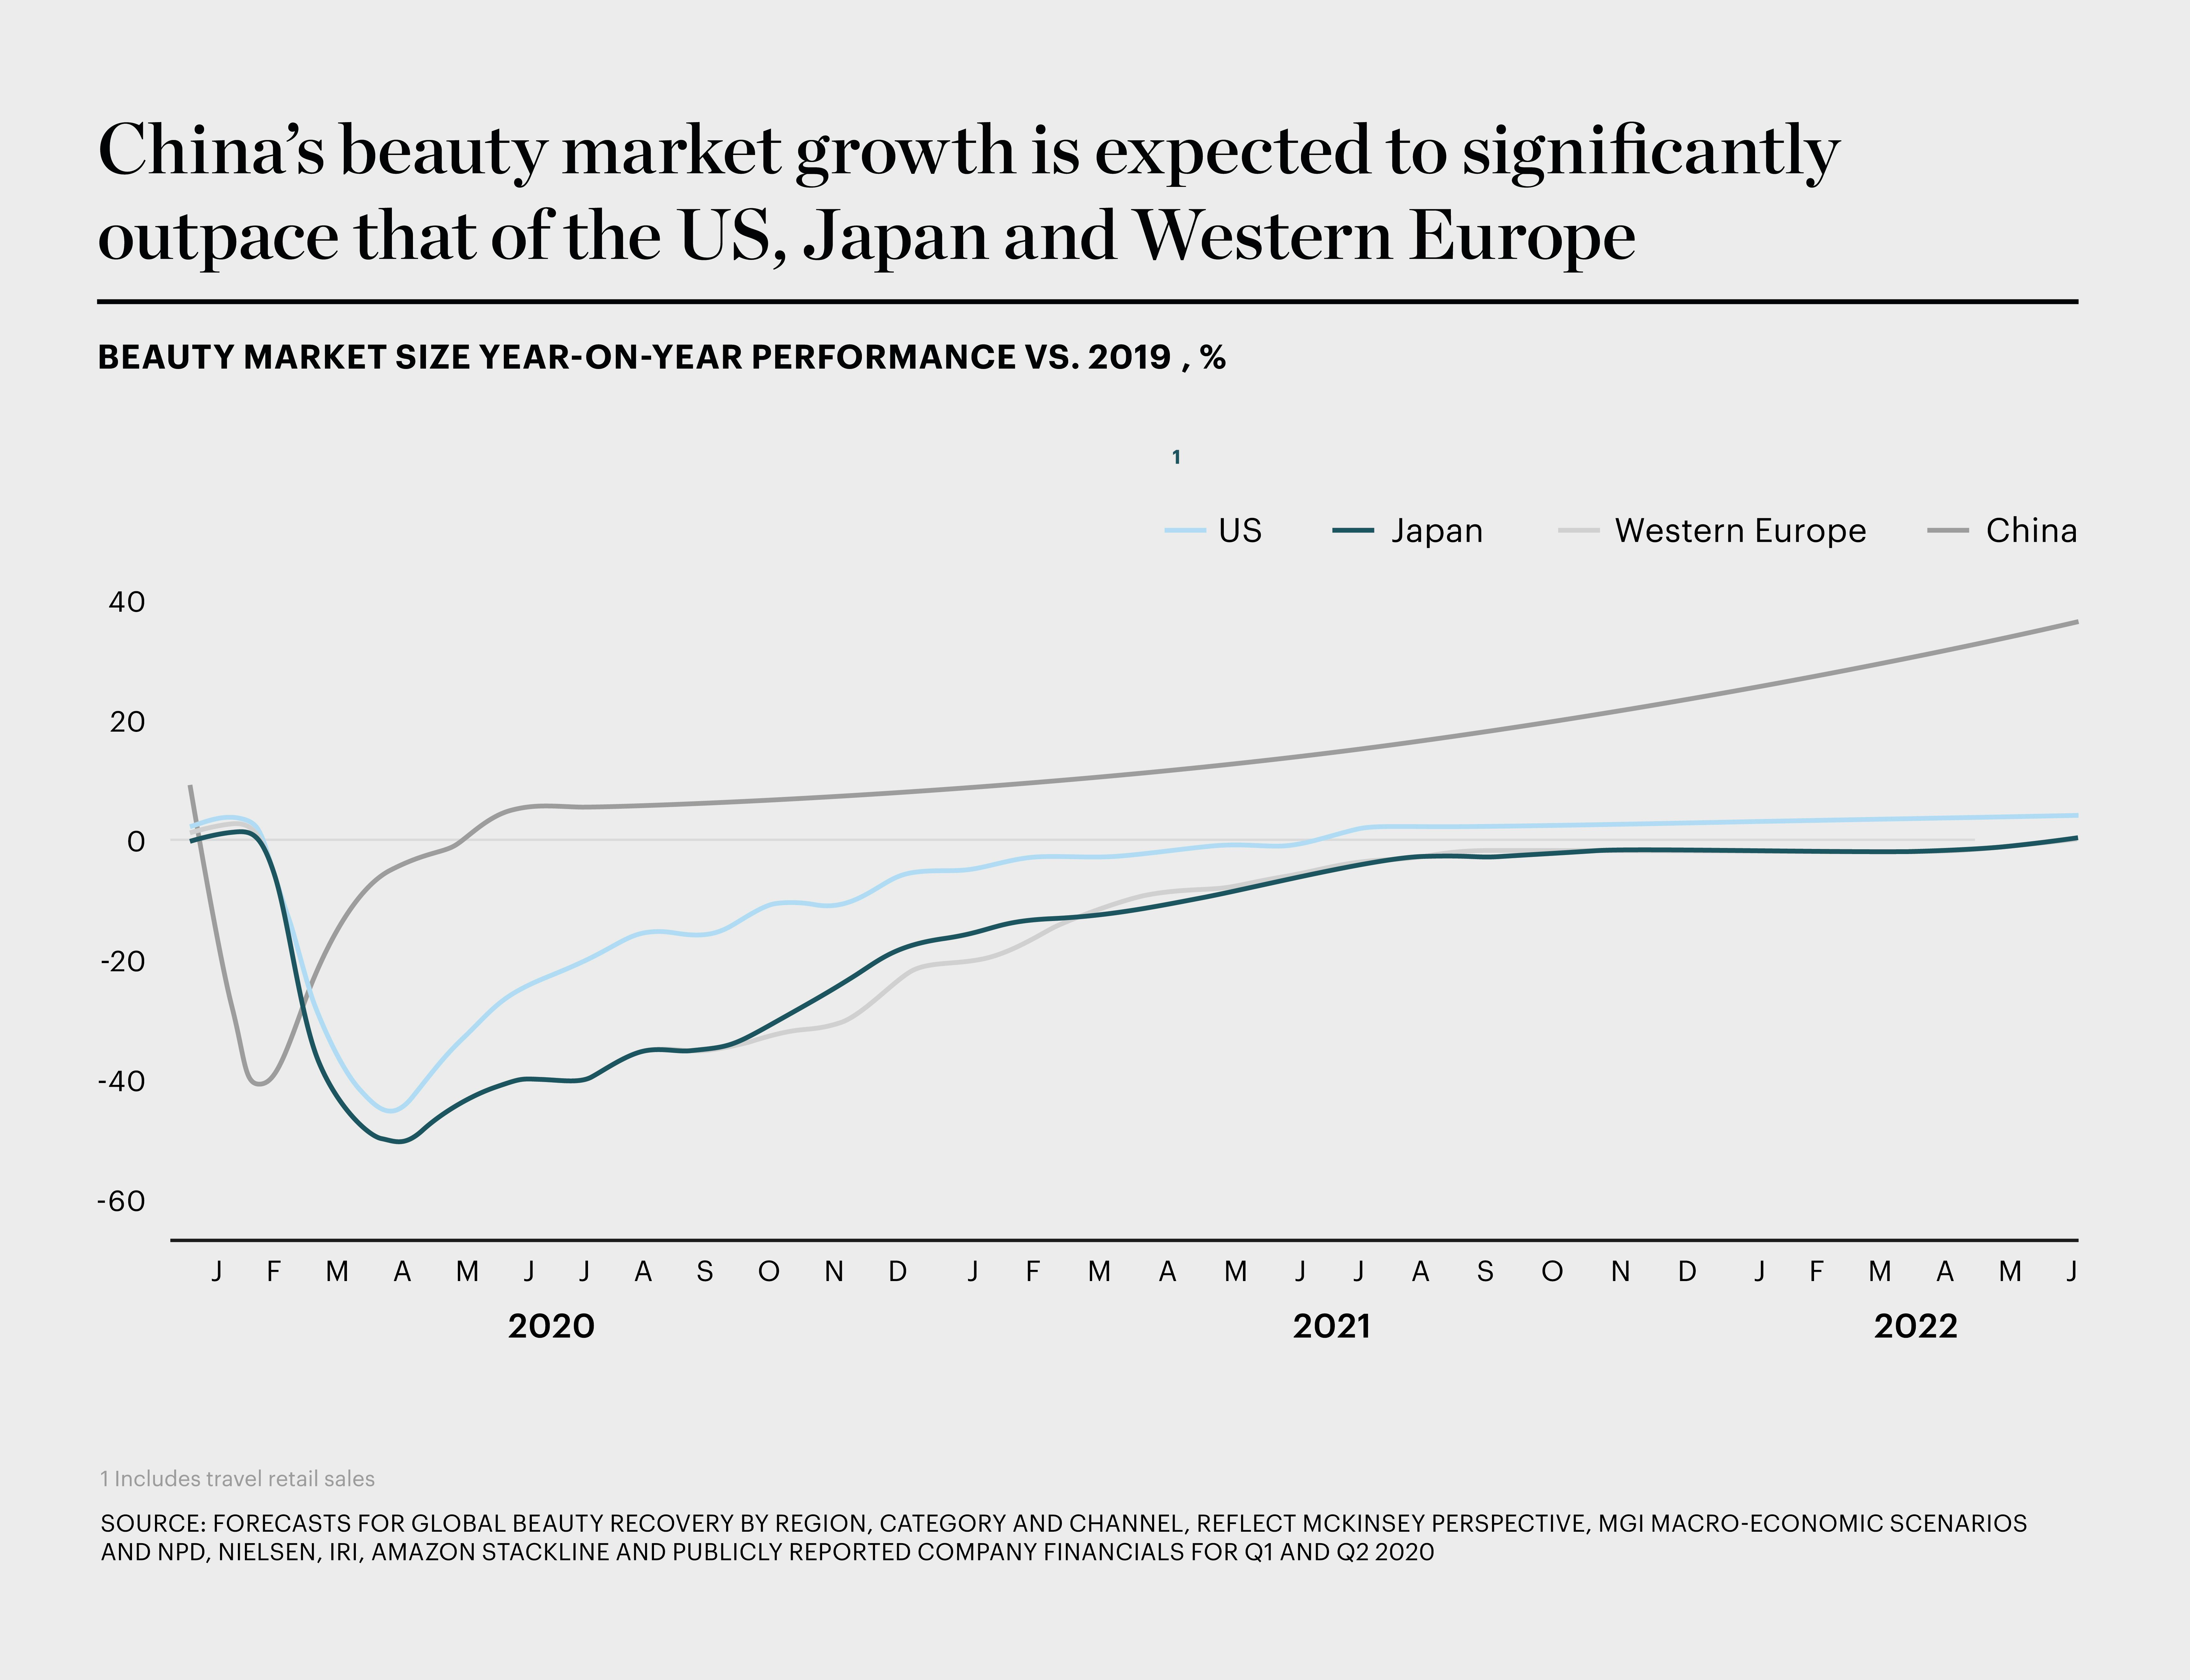 Beauty Will Make a Quick Comeback, But the Market Will Have Changed | The Business of Beauty, News & Analysis